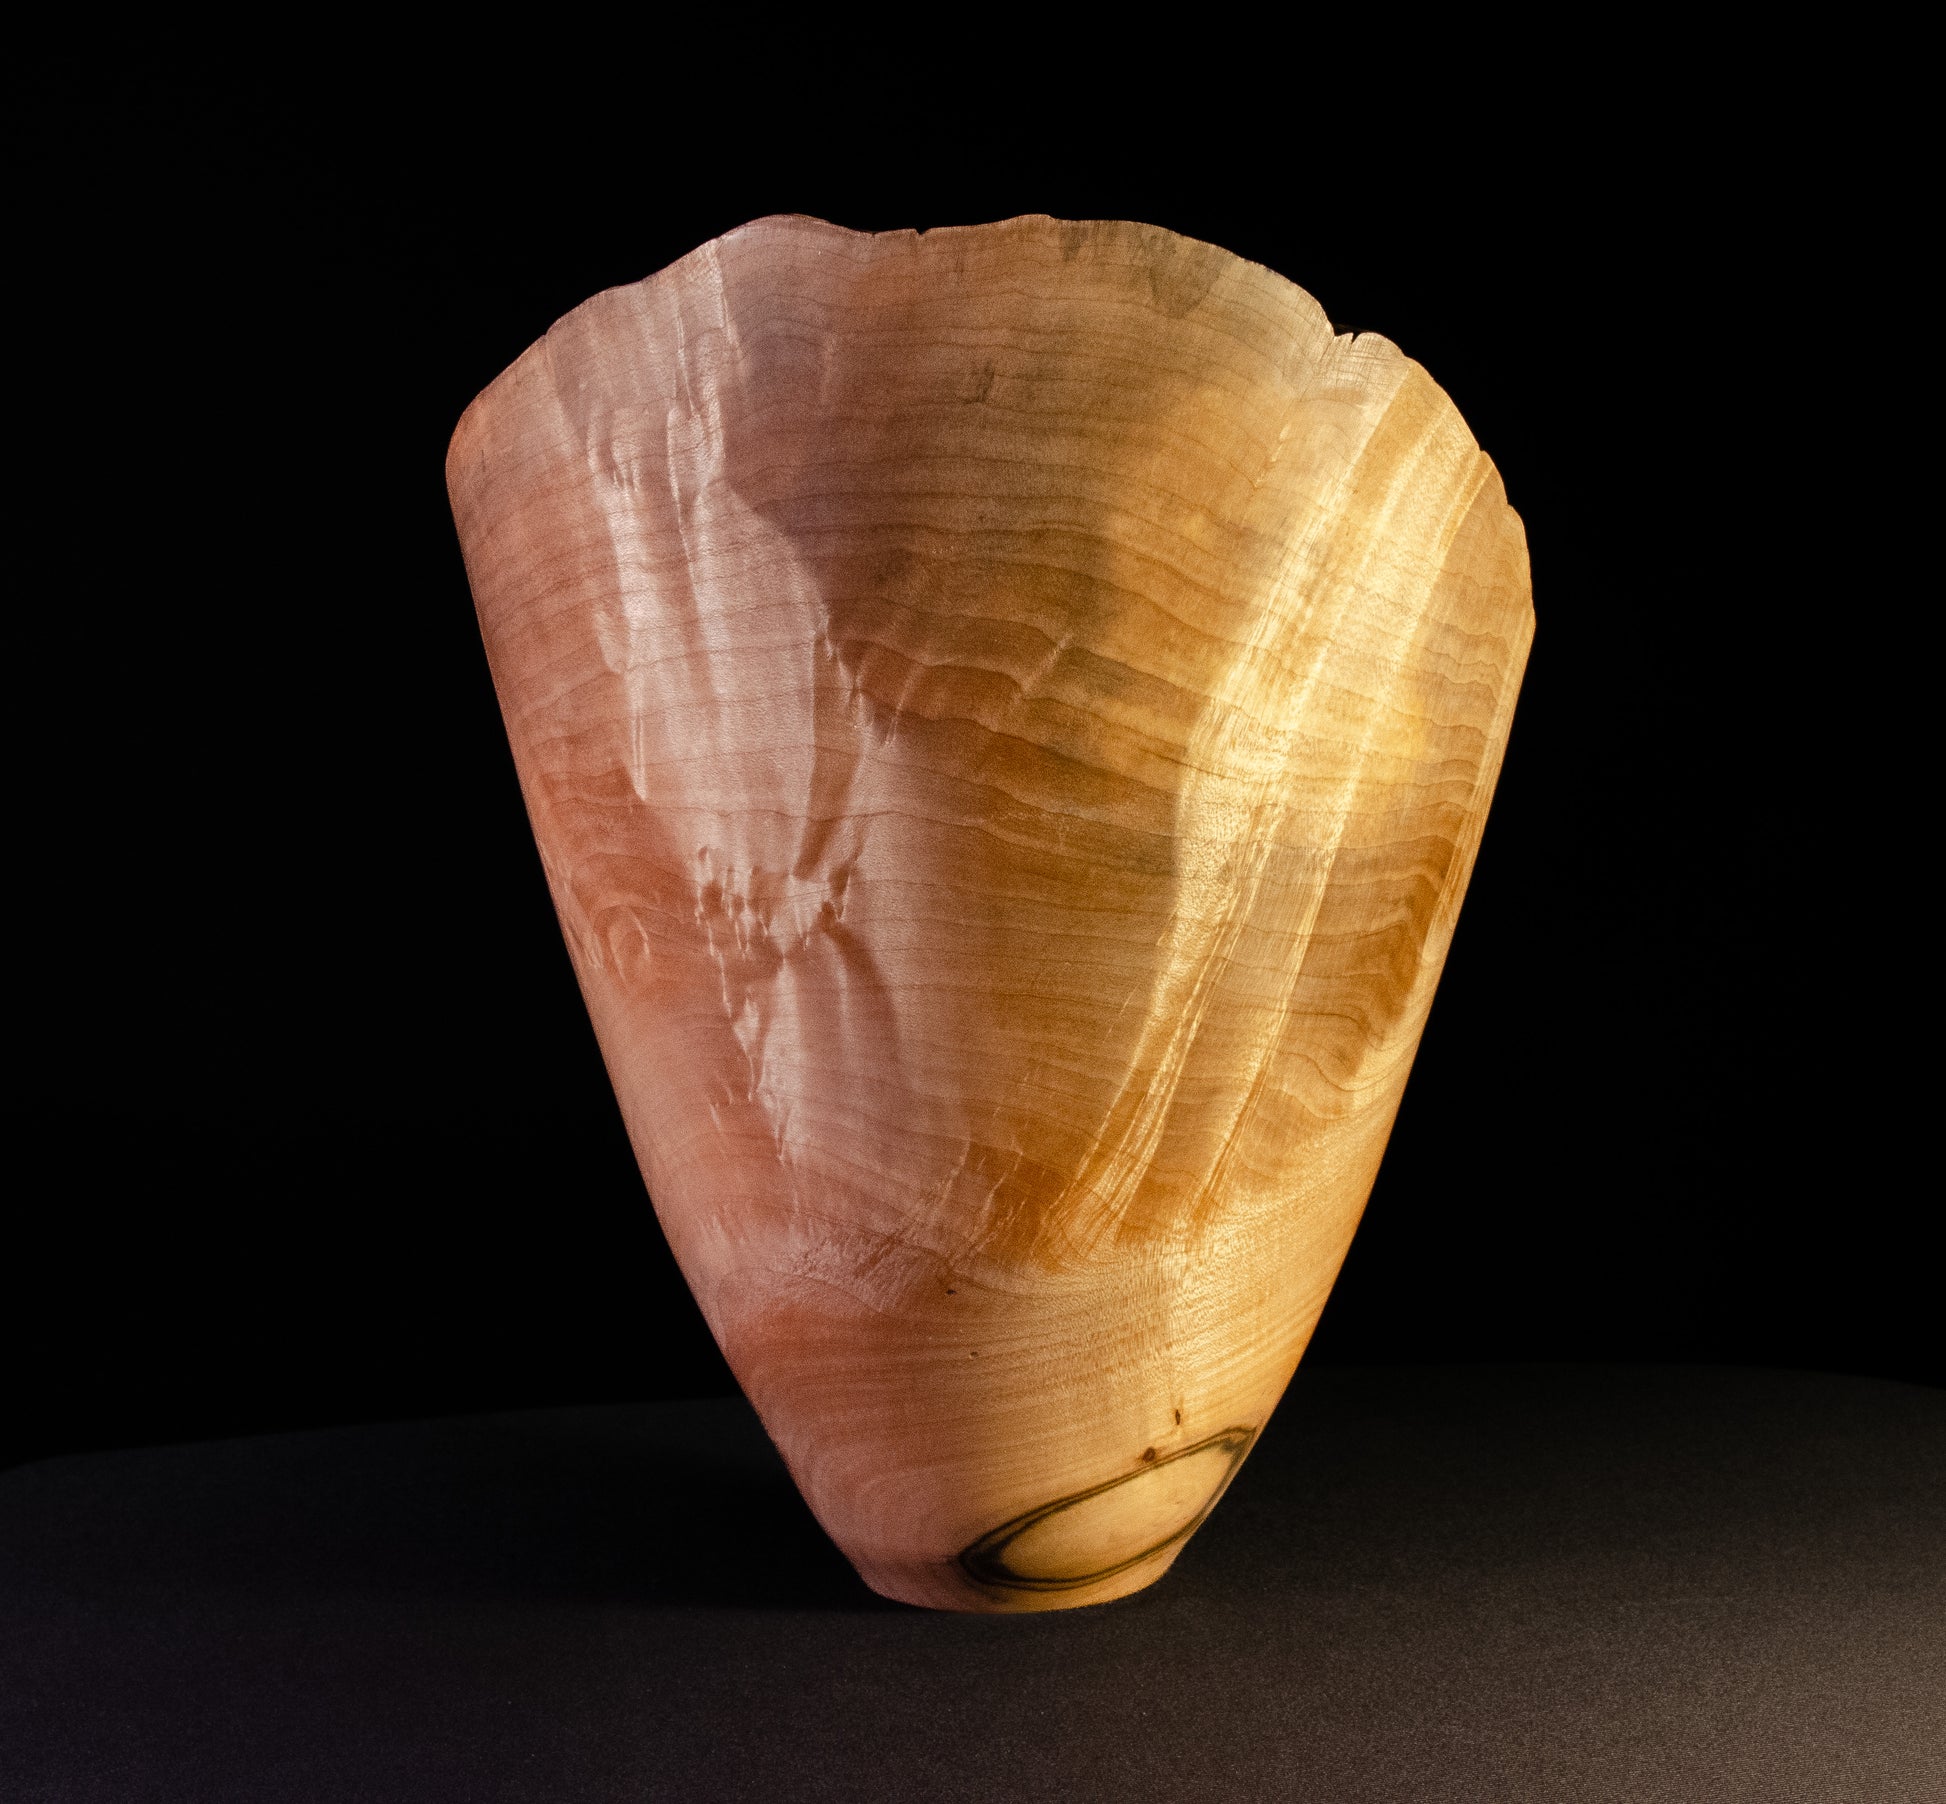 Dramatic maple vase-form with natural edge. Beautiful display, decor or gift item.